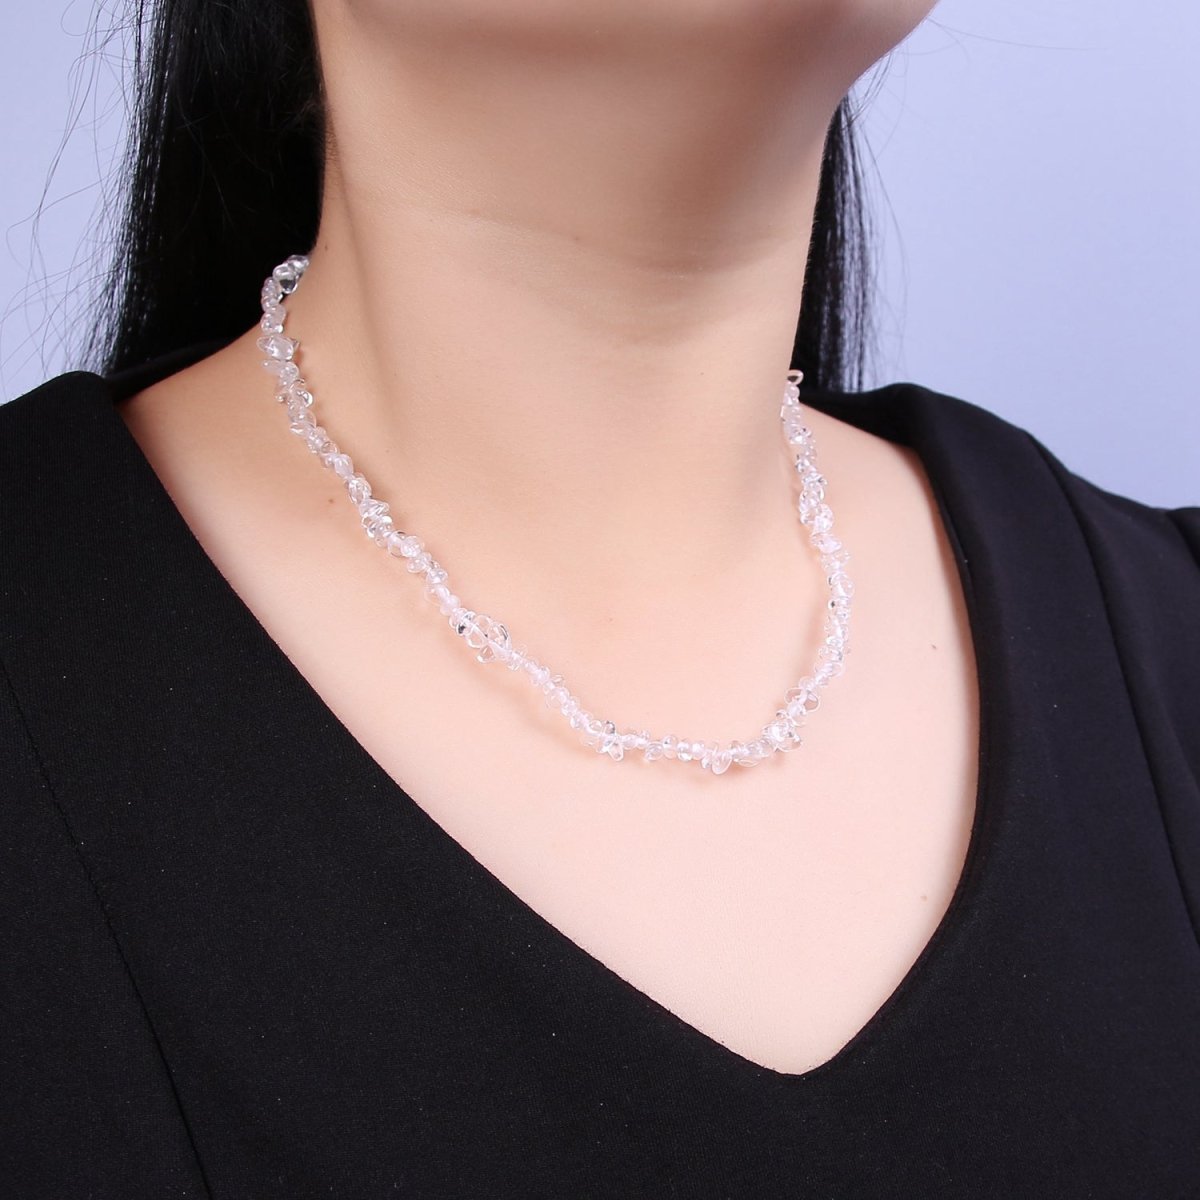 18 Inch Natural Clear Quartz Crystal Stone Bead Necklace with 2" Extender | WA-644 Clearance Pricing - DLUXCA